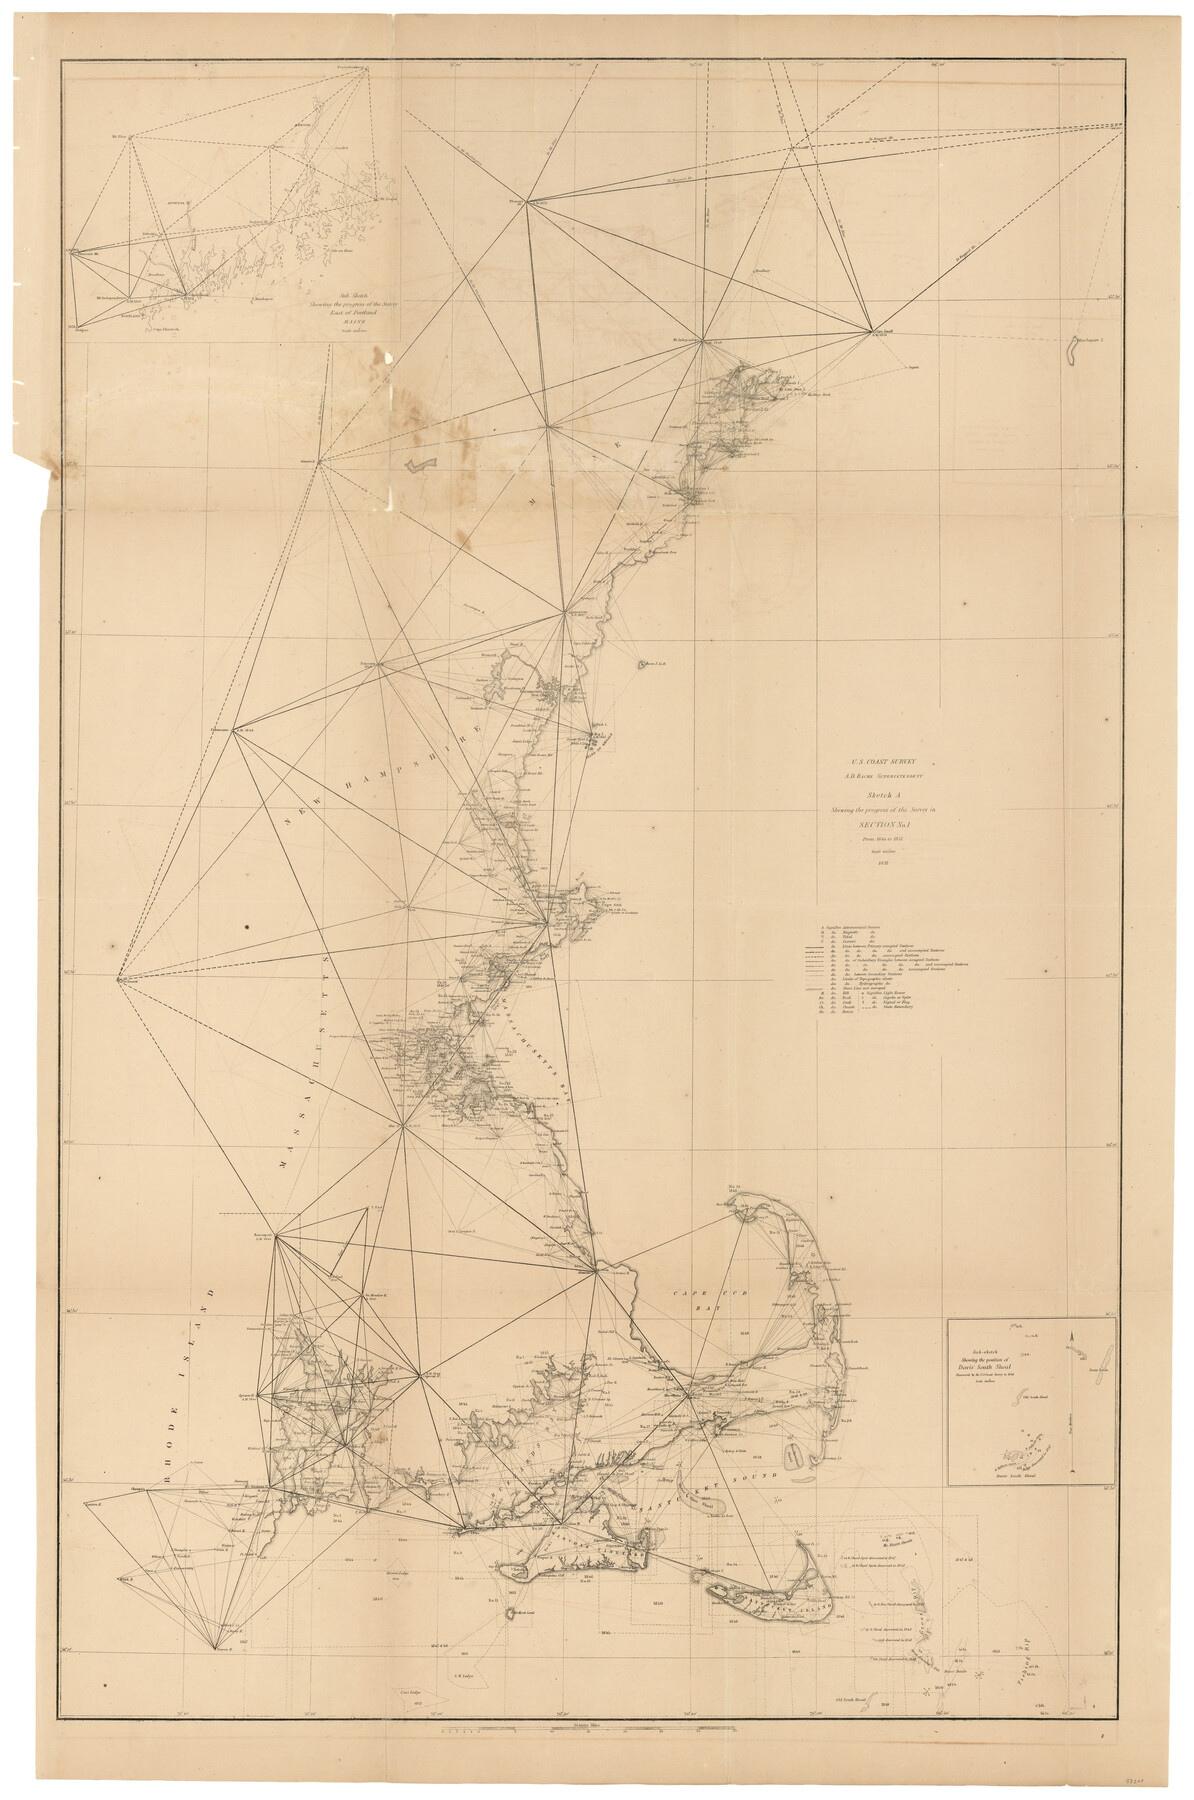 97200, Sketch A Shewing the progress of the Survey in Section No. 1 From 1844 to 1852, General Map Collection